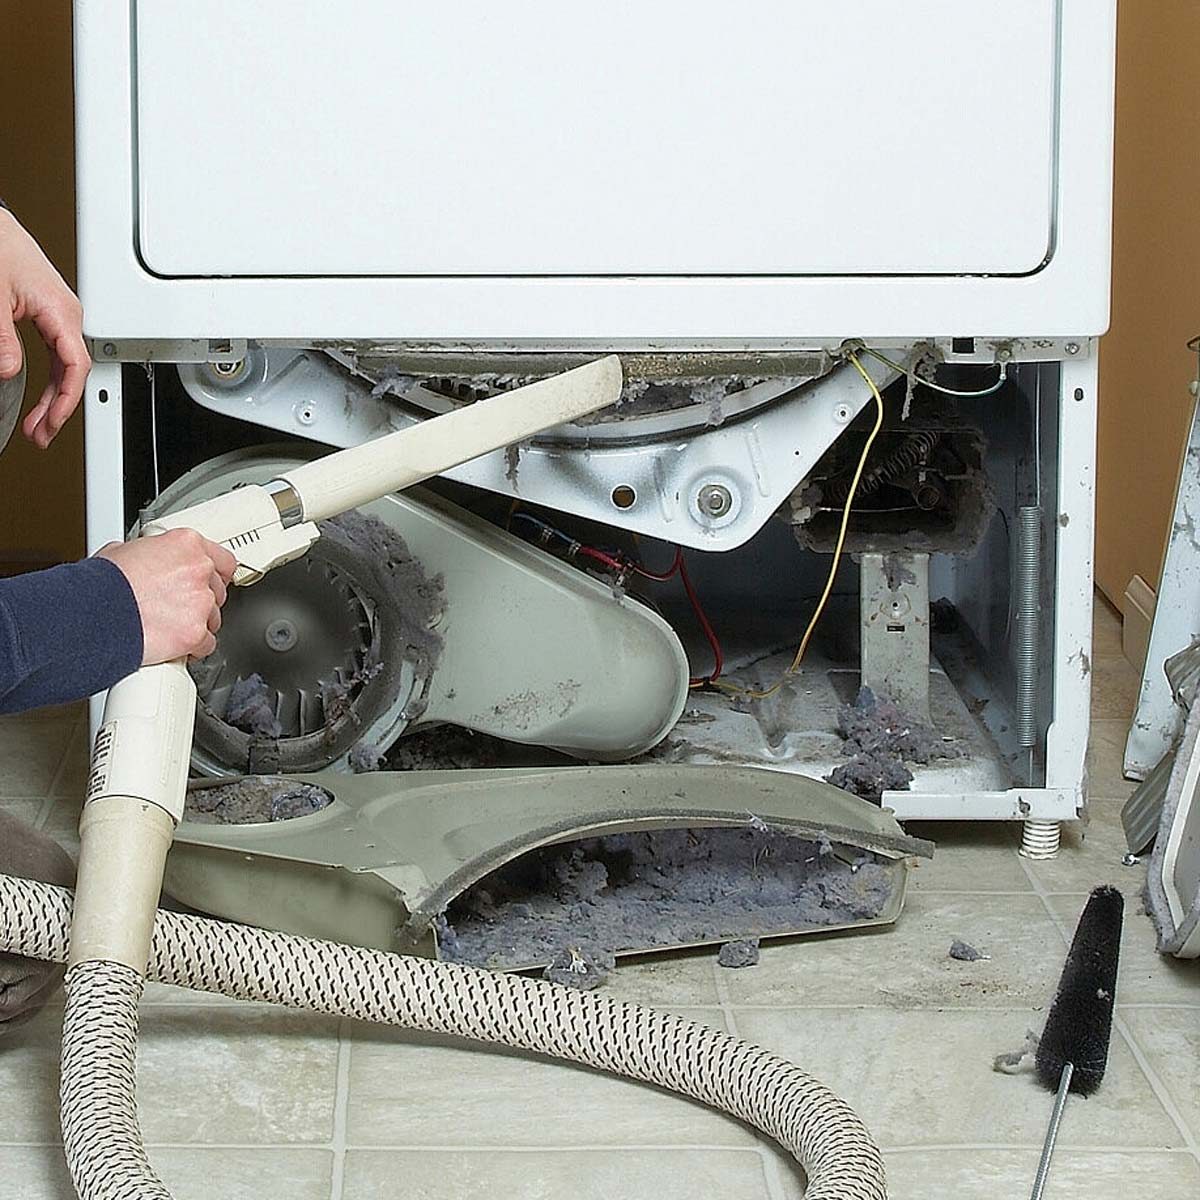 Things You've Probably Never Cleaned (But Really Should)